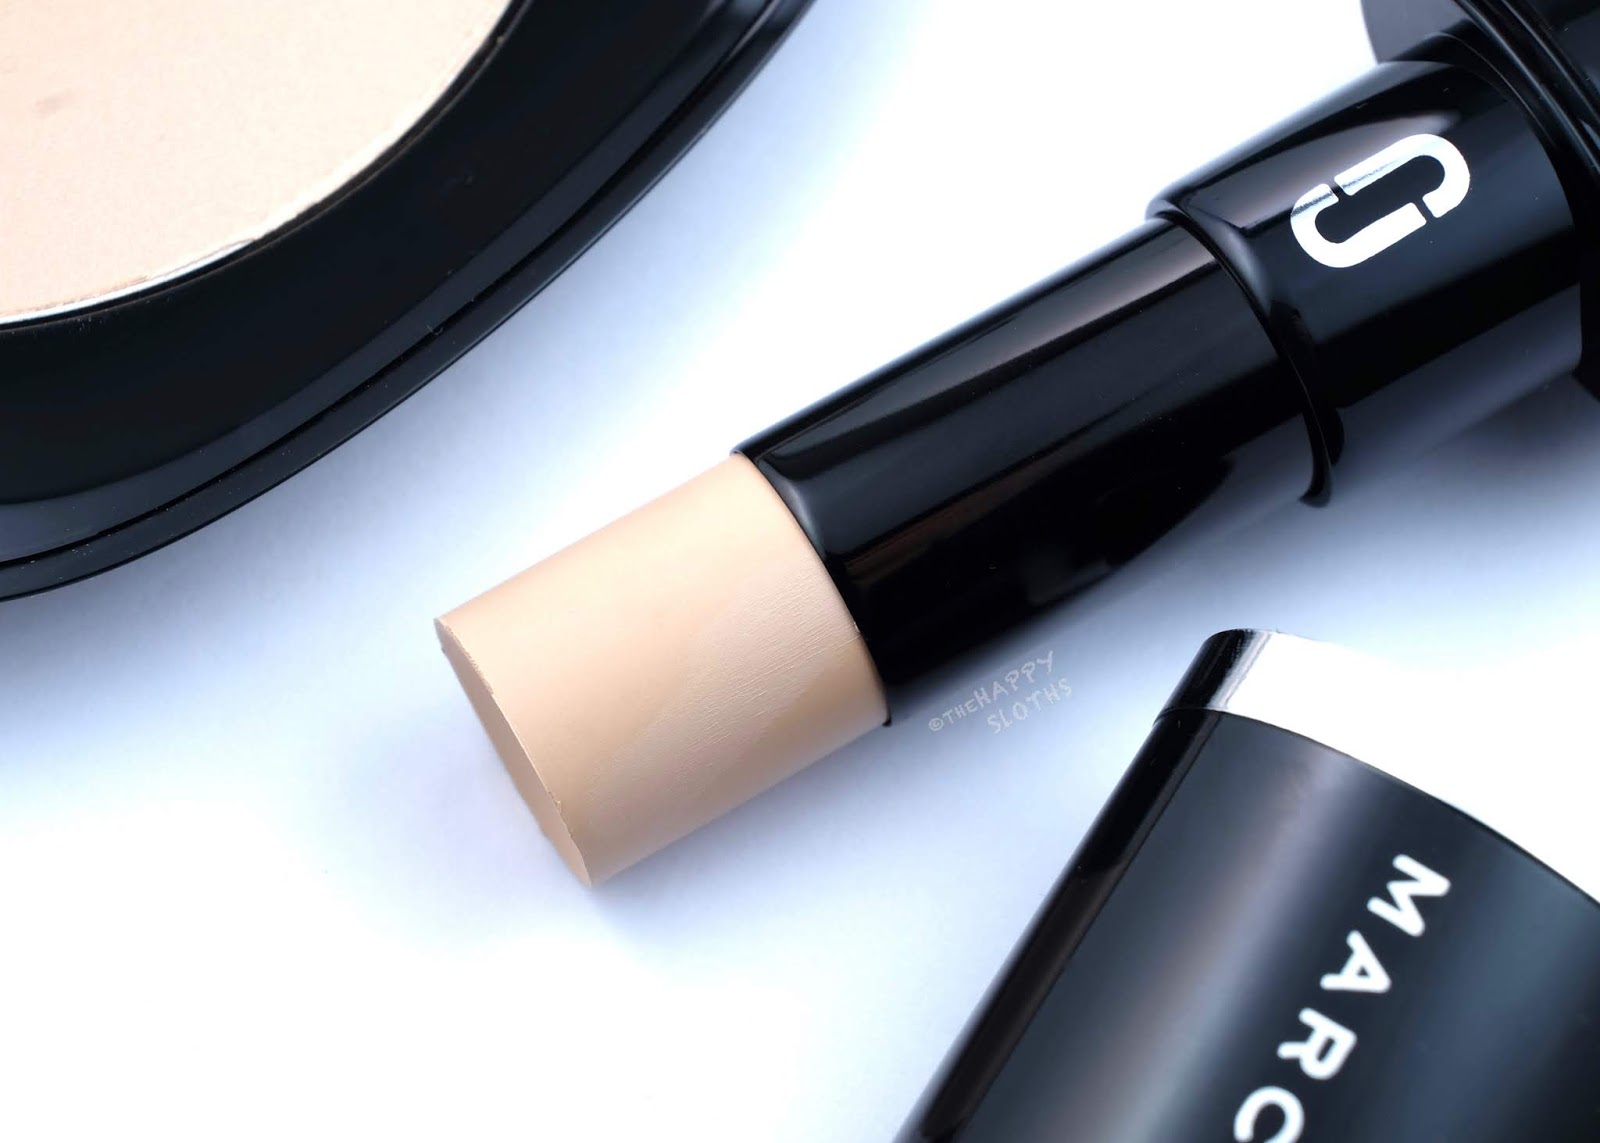 Marc Jacobs | Accomplice Concealer & Touch-Up Stick in "10 Fair": Review and Swatches